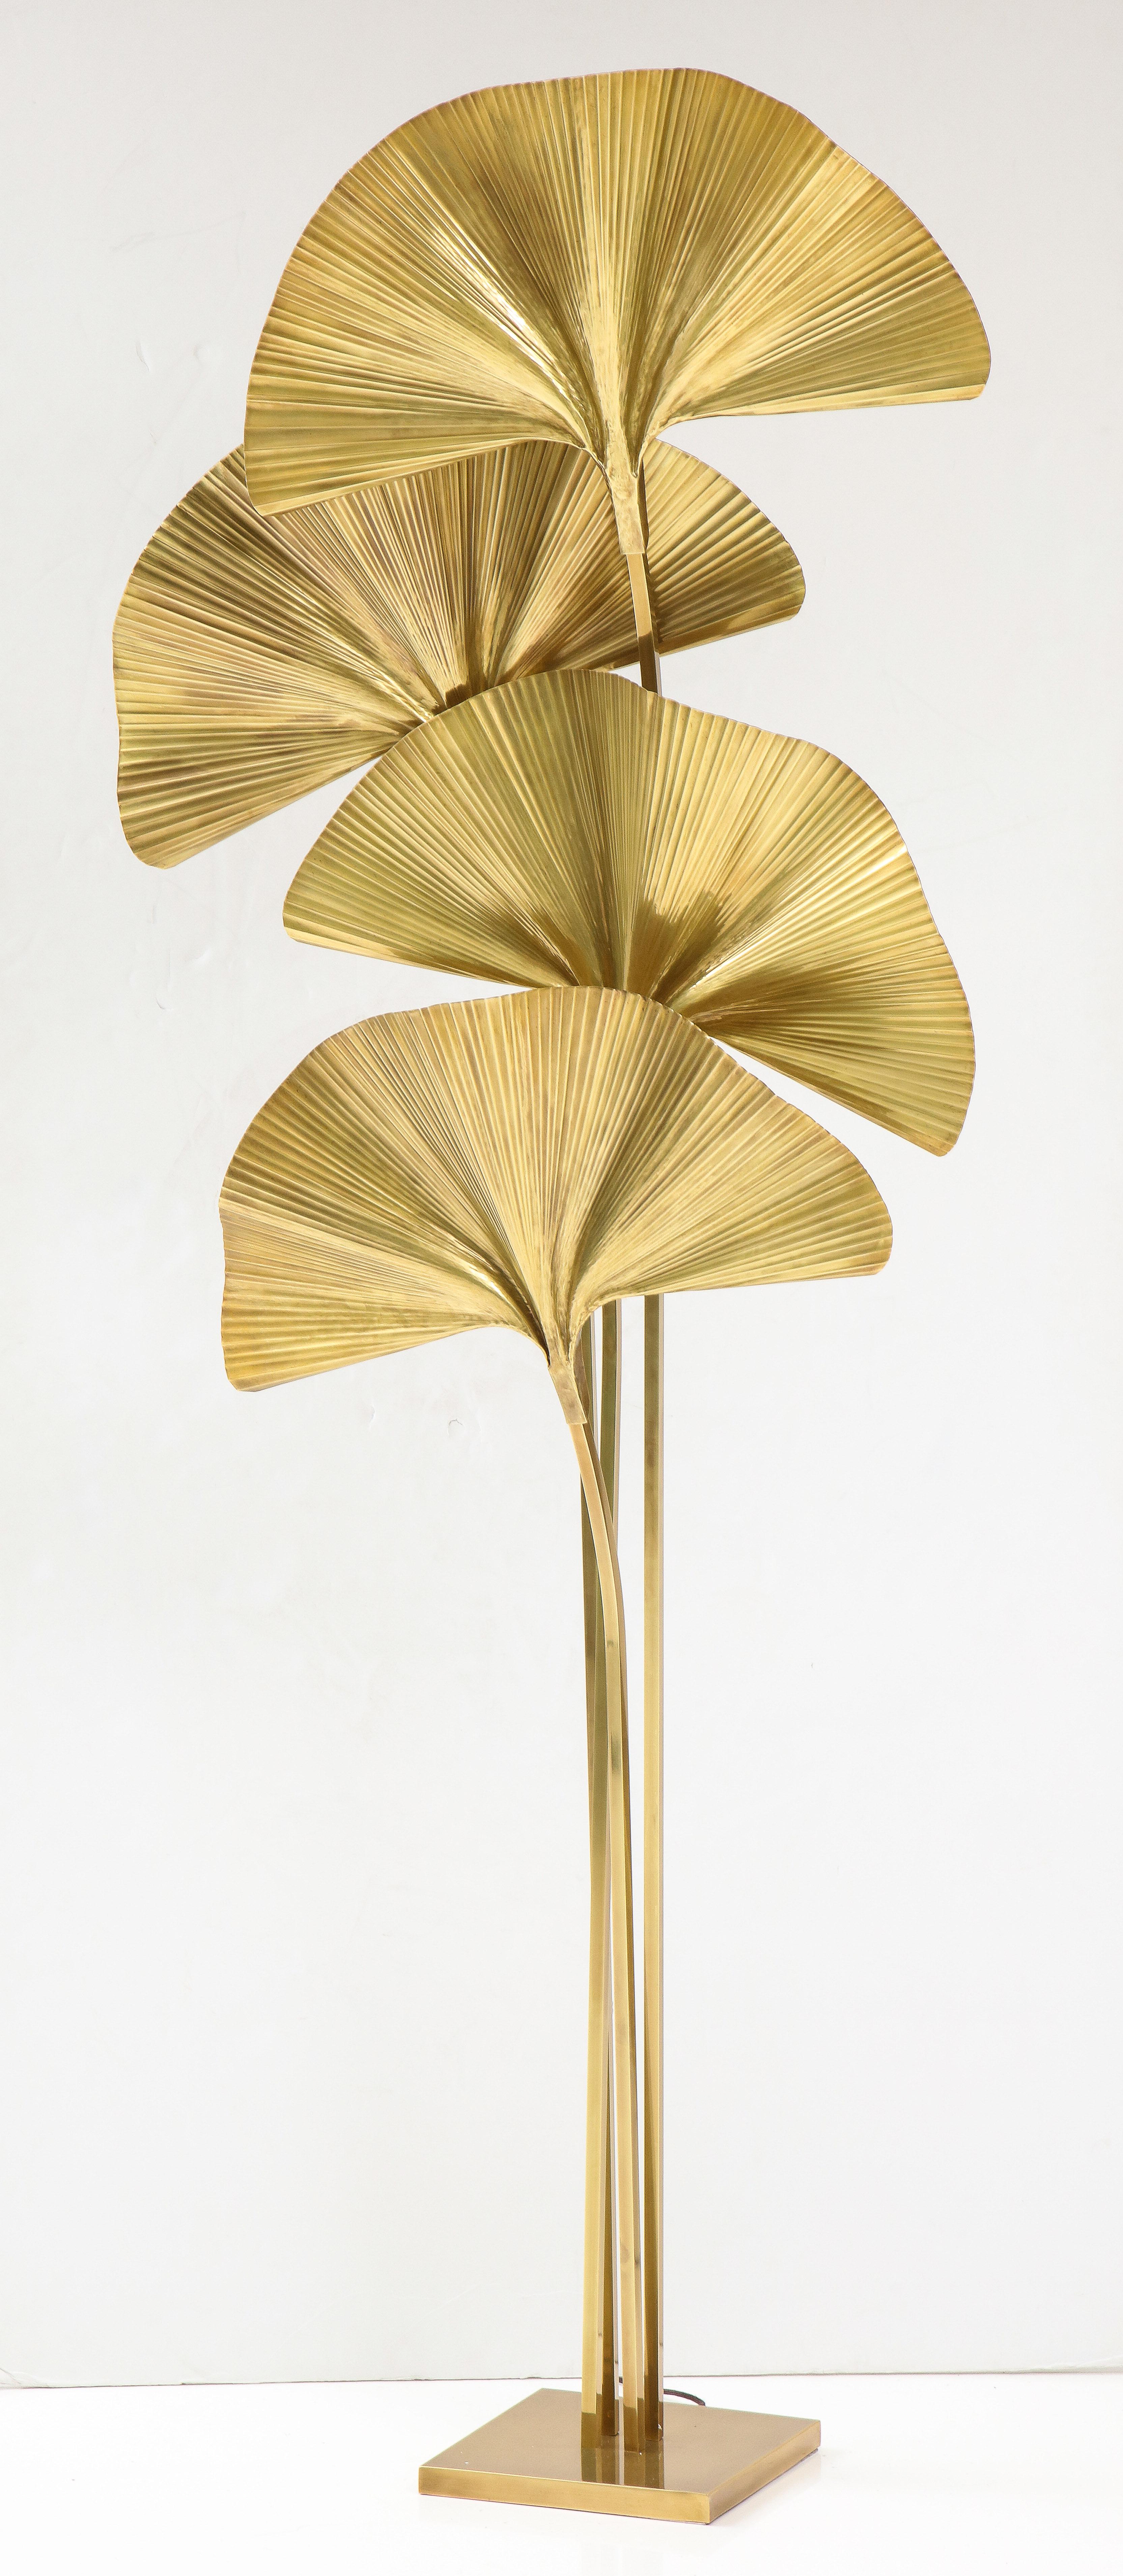 Carlo Giorgi for Bottega Gadda large and elegant patinated gilt brass four-leaf ginkgo floor lamp with undulating embossed leaves, handmade using repoussé and chasing techniques, mounted on stems attached to square base, Italy, 1970s. 
Rewired to